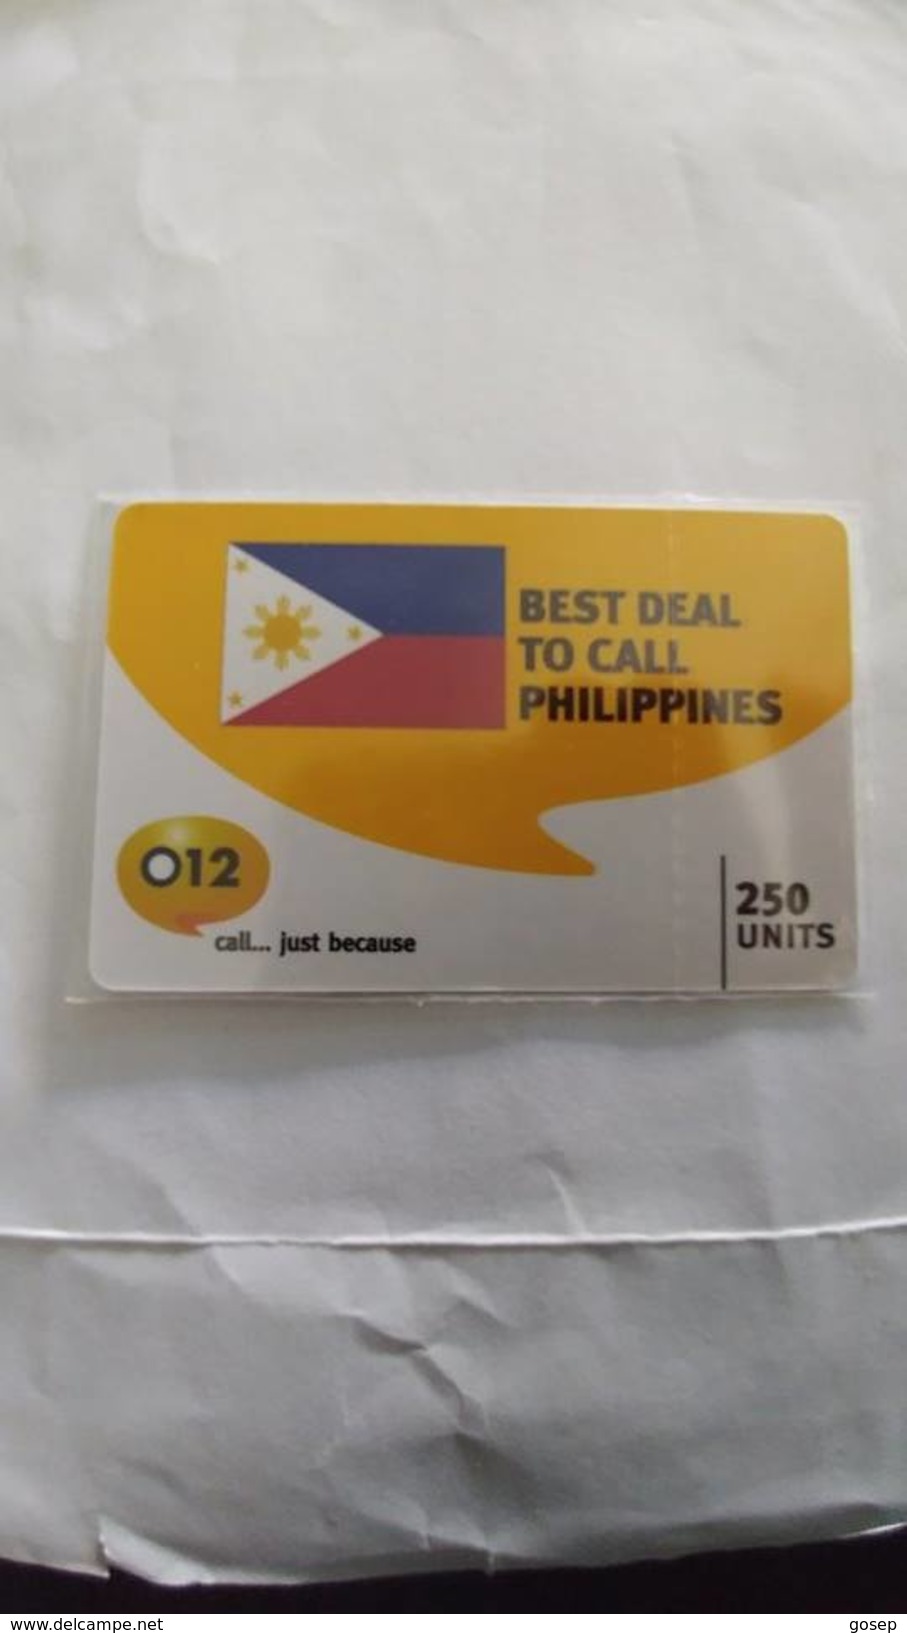 Israel-best Deal To Call Philippines-(1)-zabra-(250units)-(012call Just Because)-(1.5.2008)-mint Card - Philippines